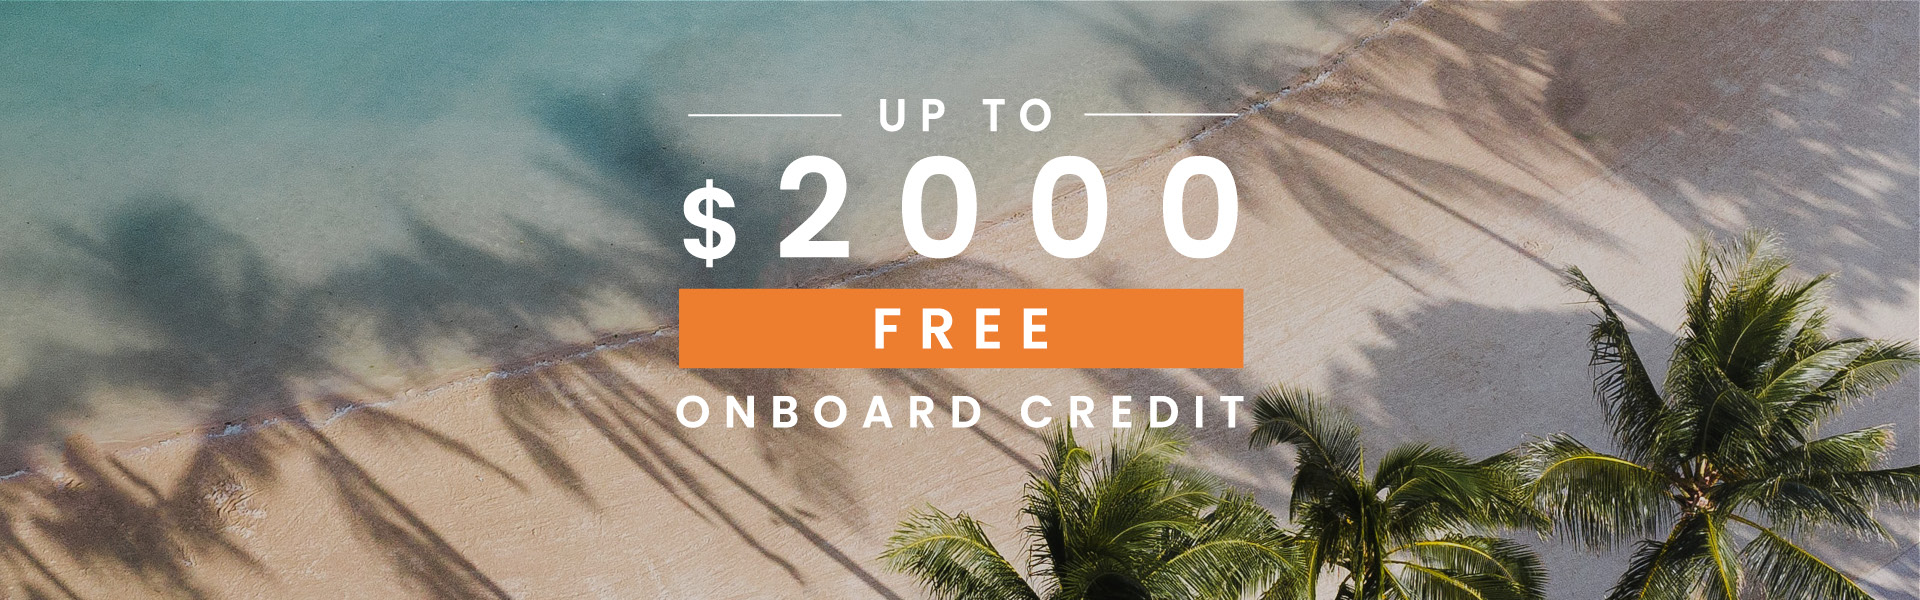 Panache Cruises Promotion - Up to $2000 onboard credit